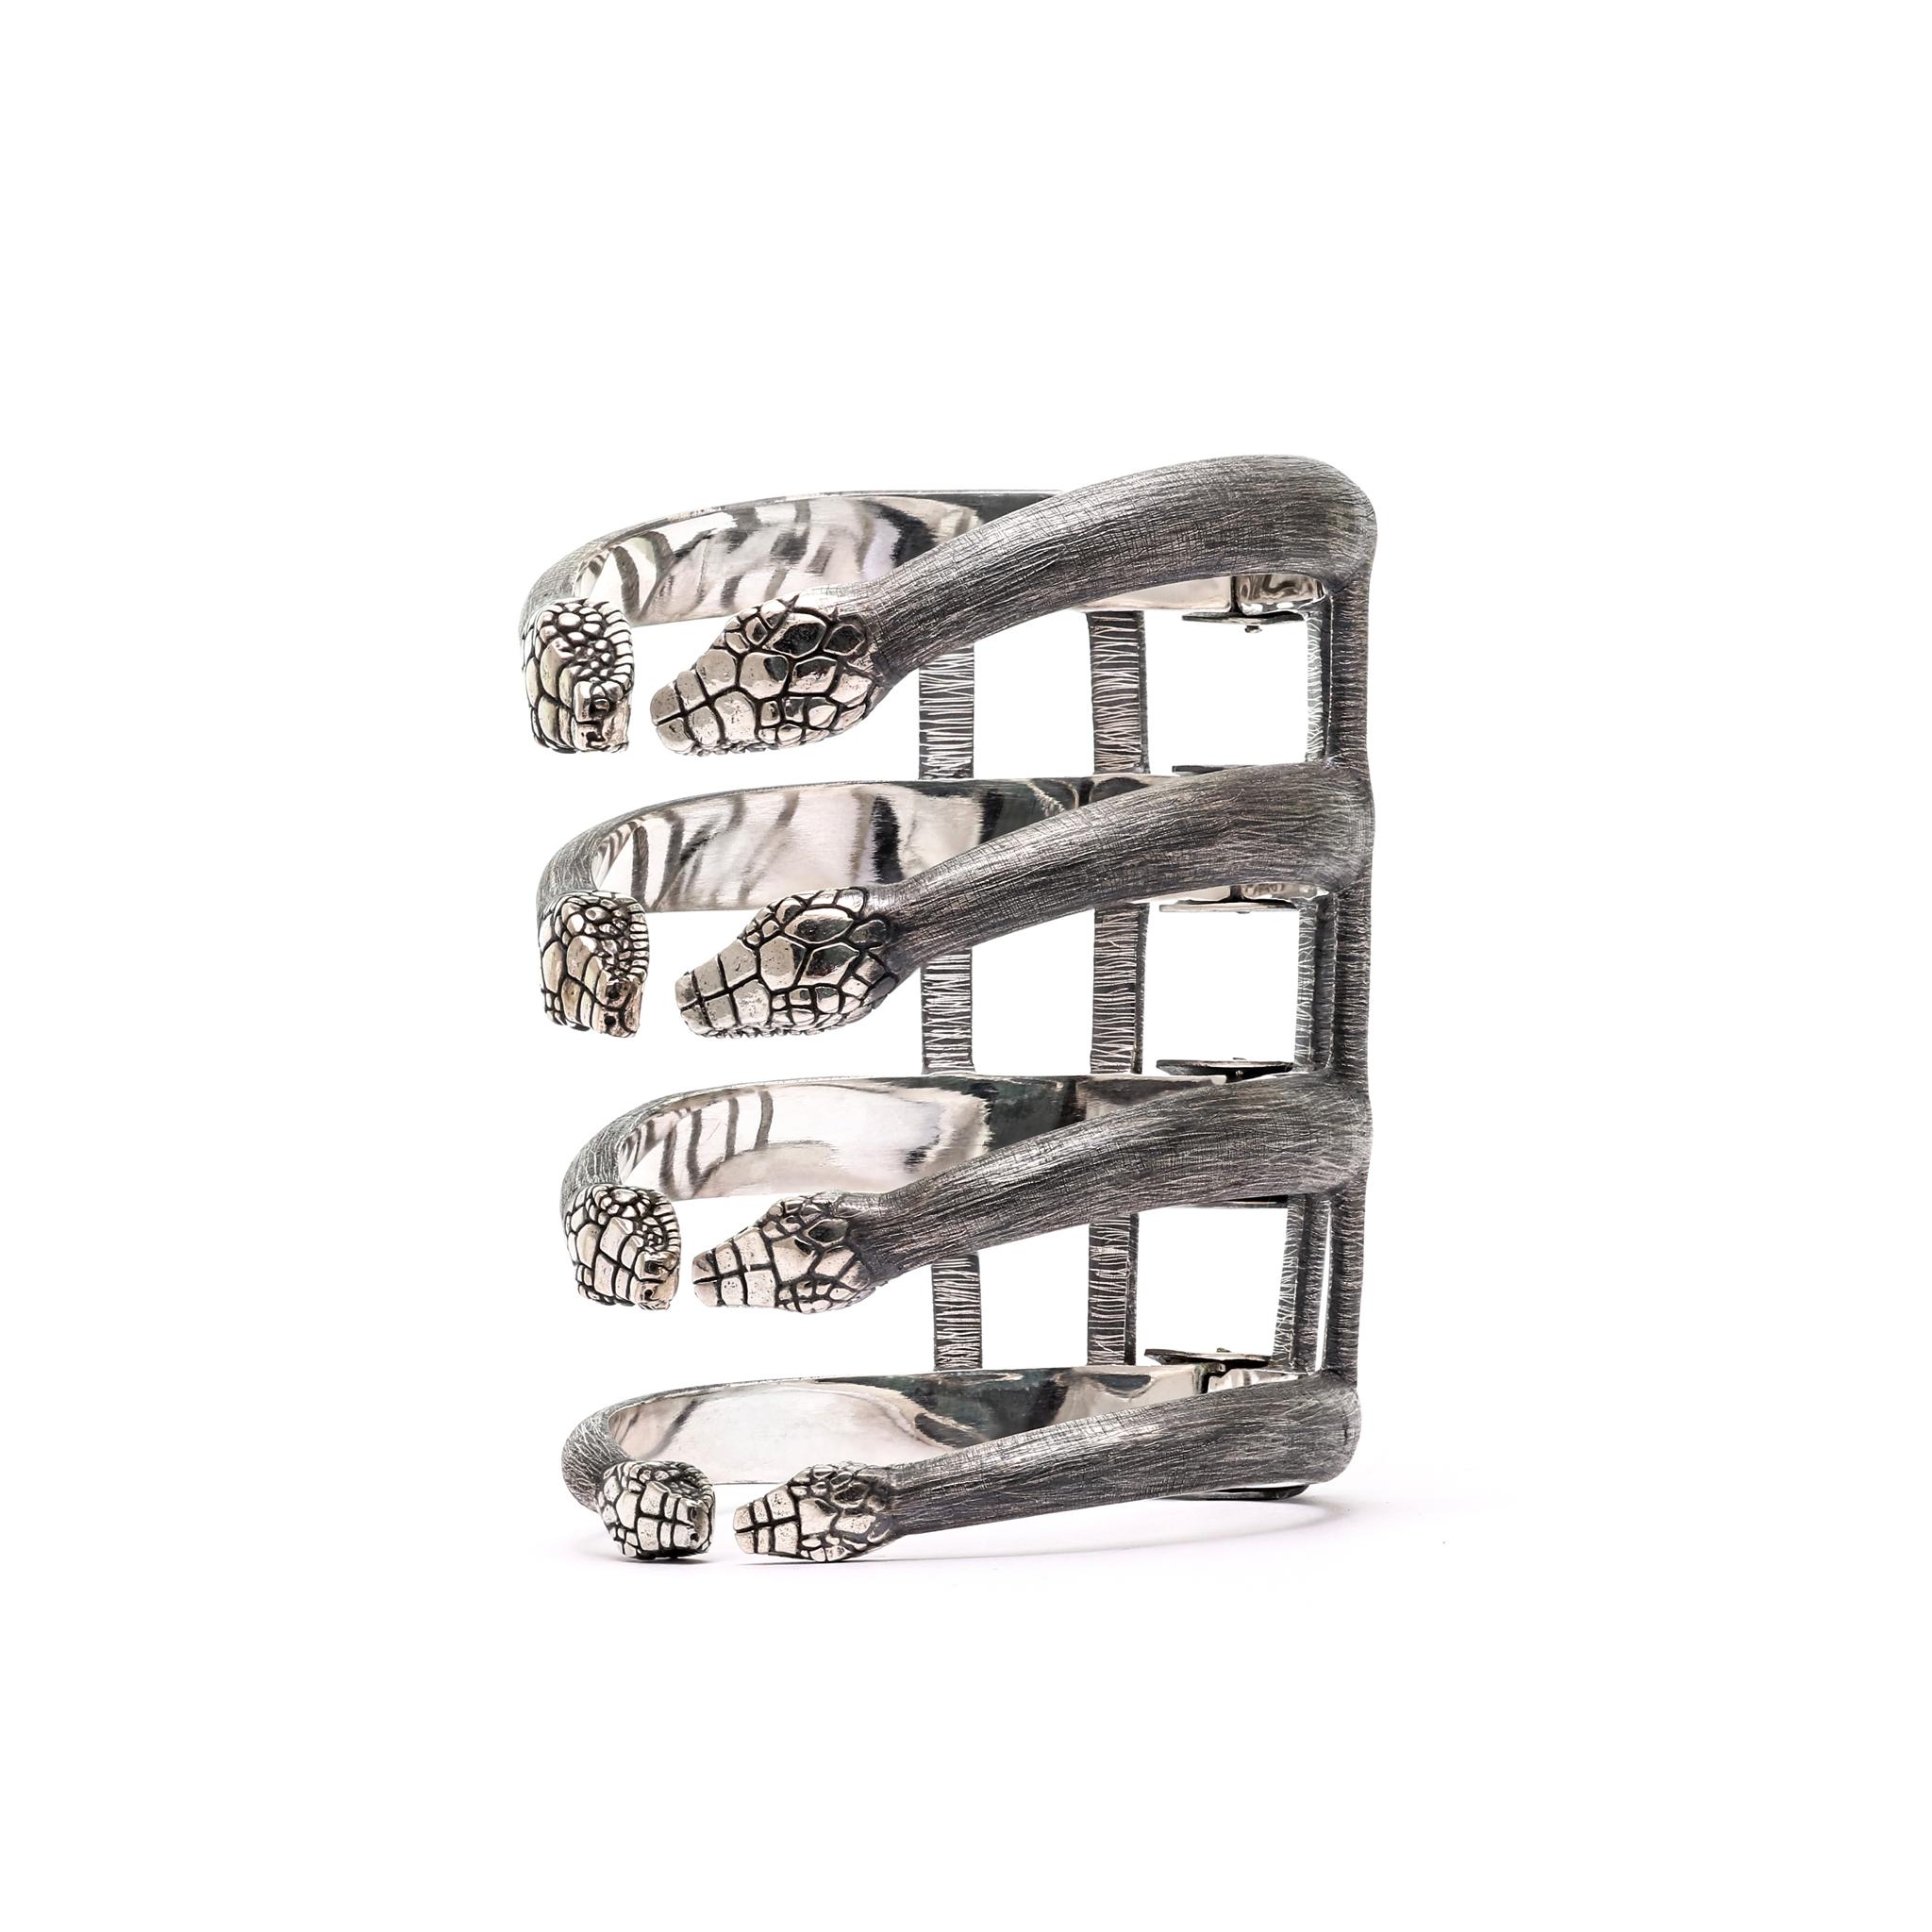 Modern Hydra Bracelet with 8 Snake Heads Crafted from Sterling Silver Etched & Oxidised